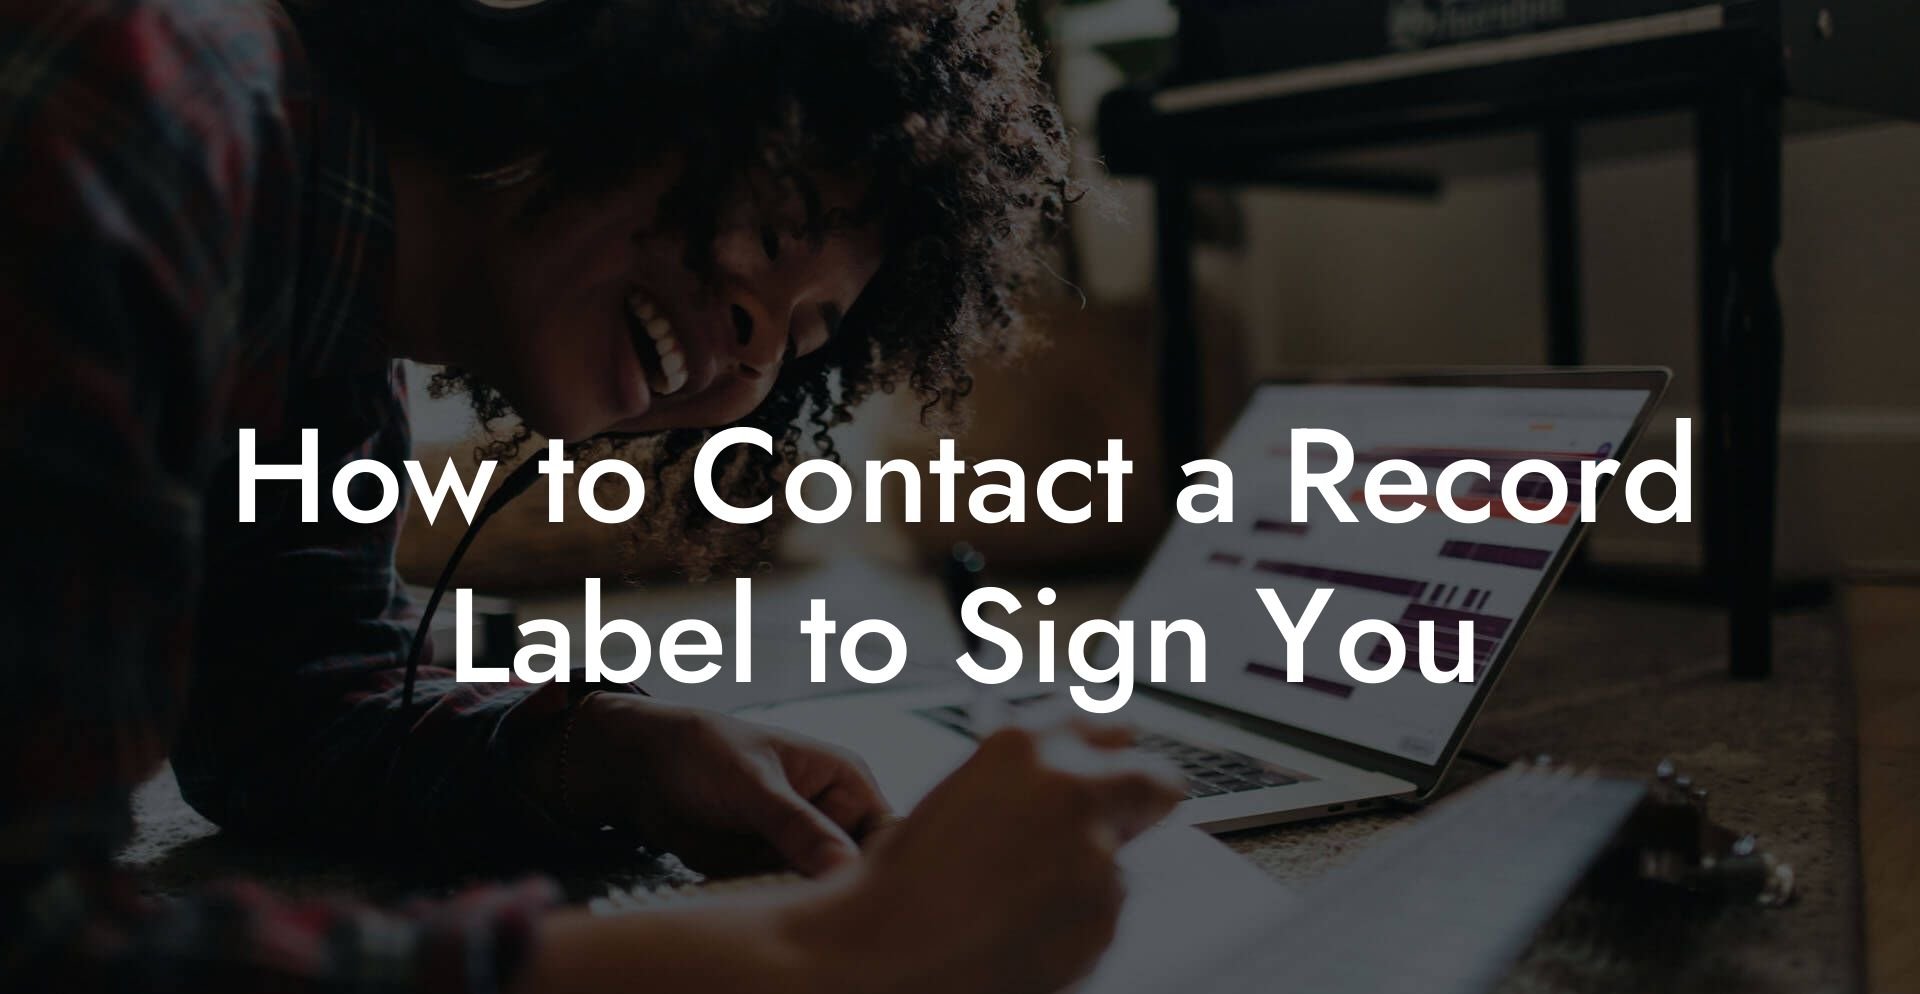 How to Contact a Record Label to Sign You